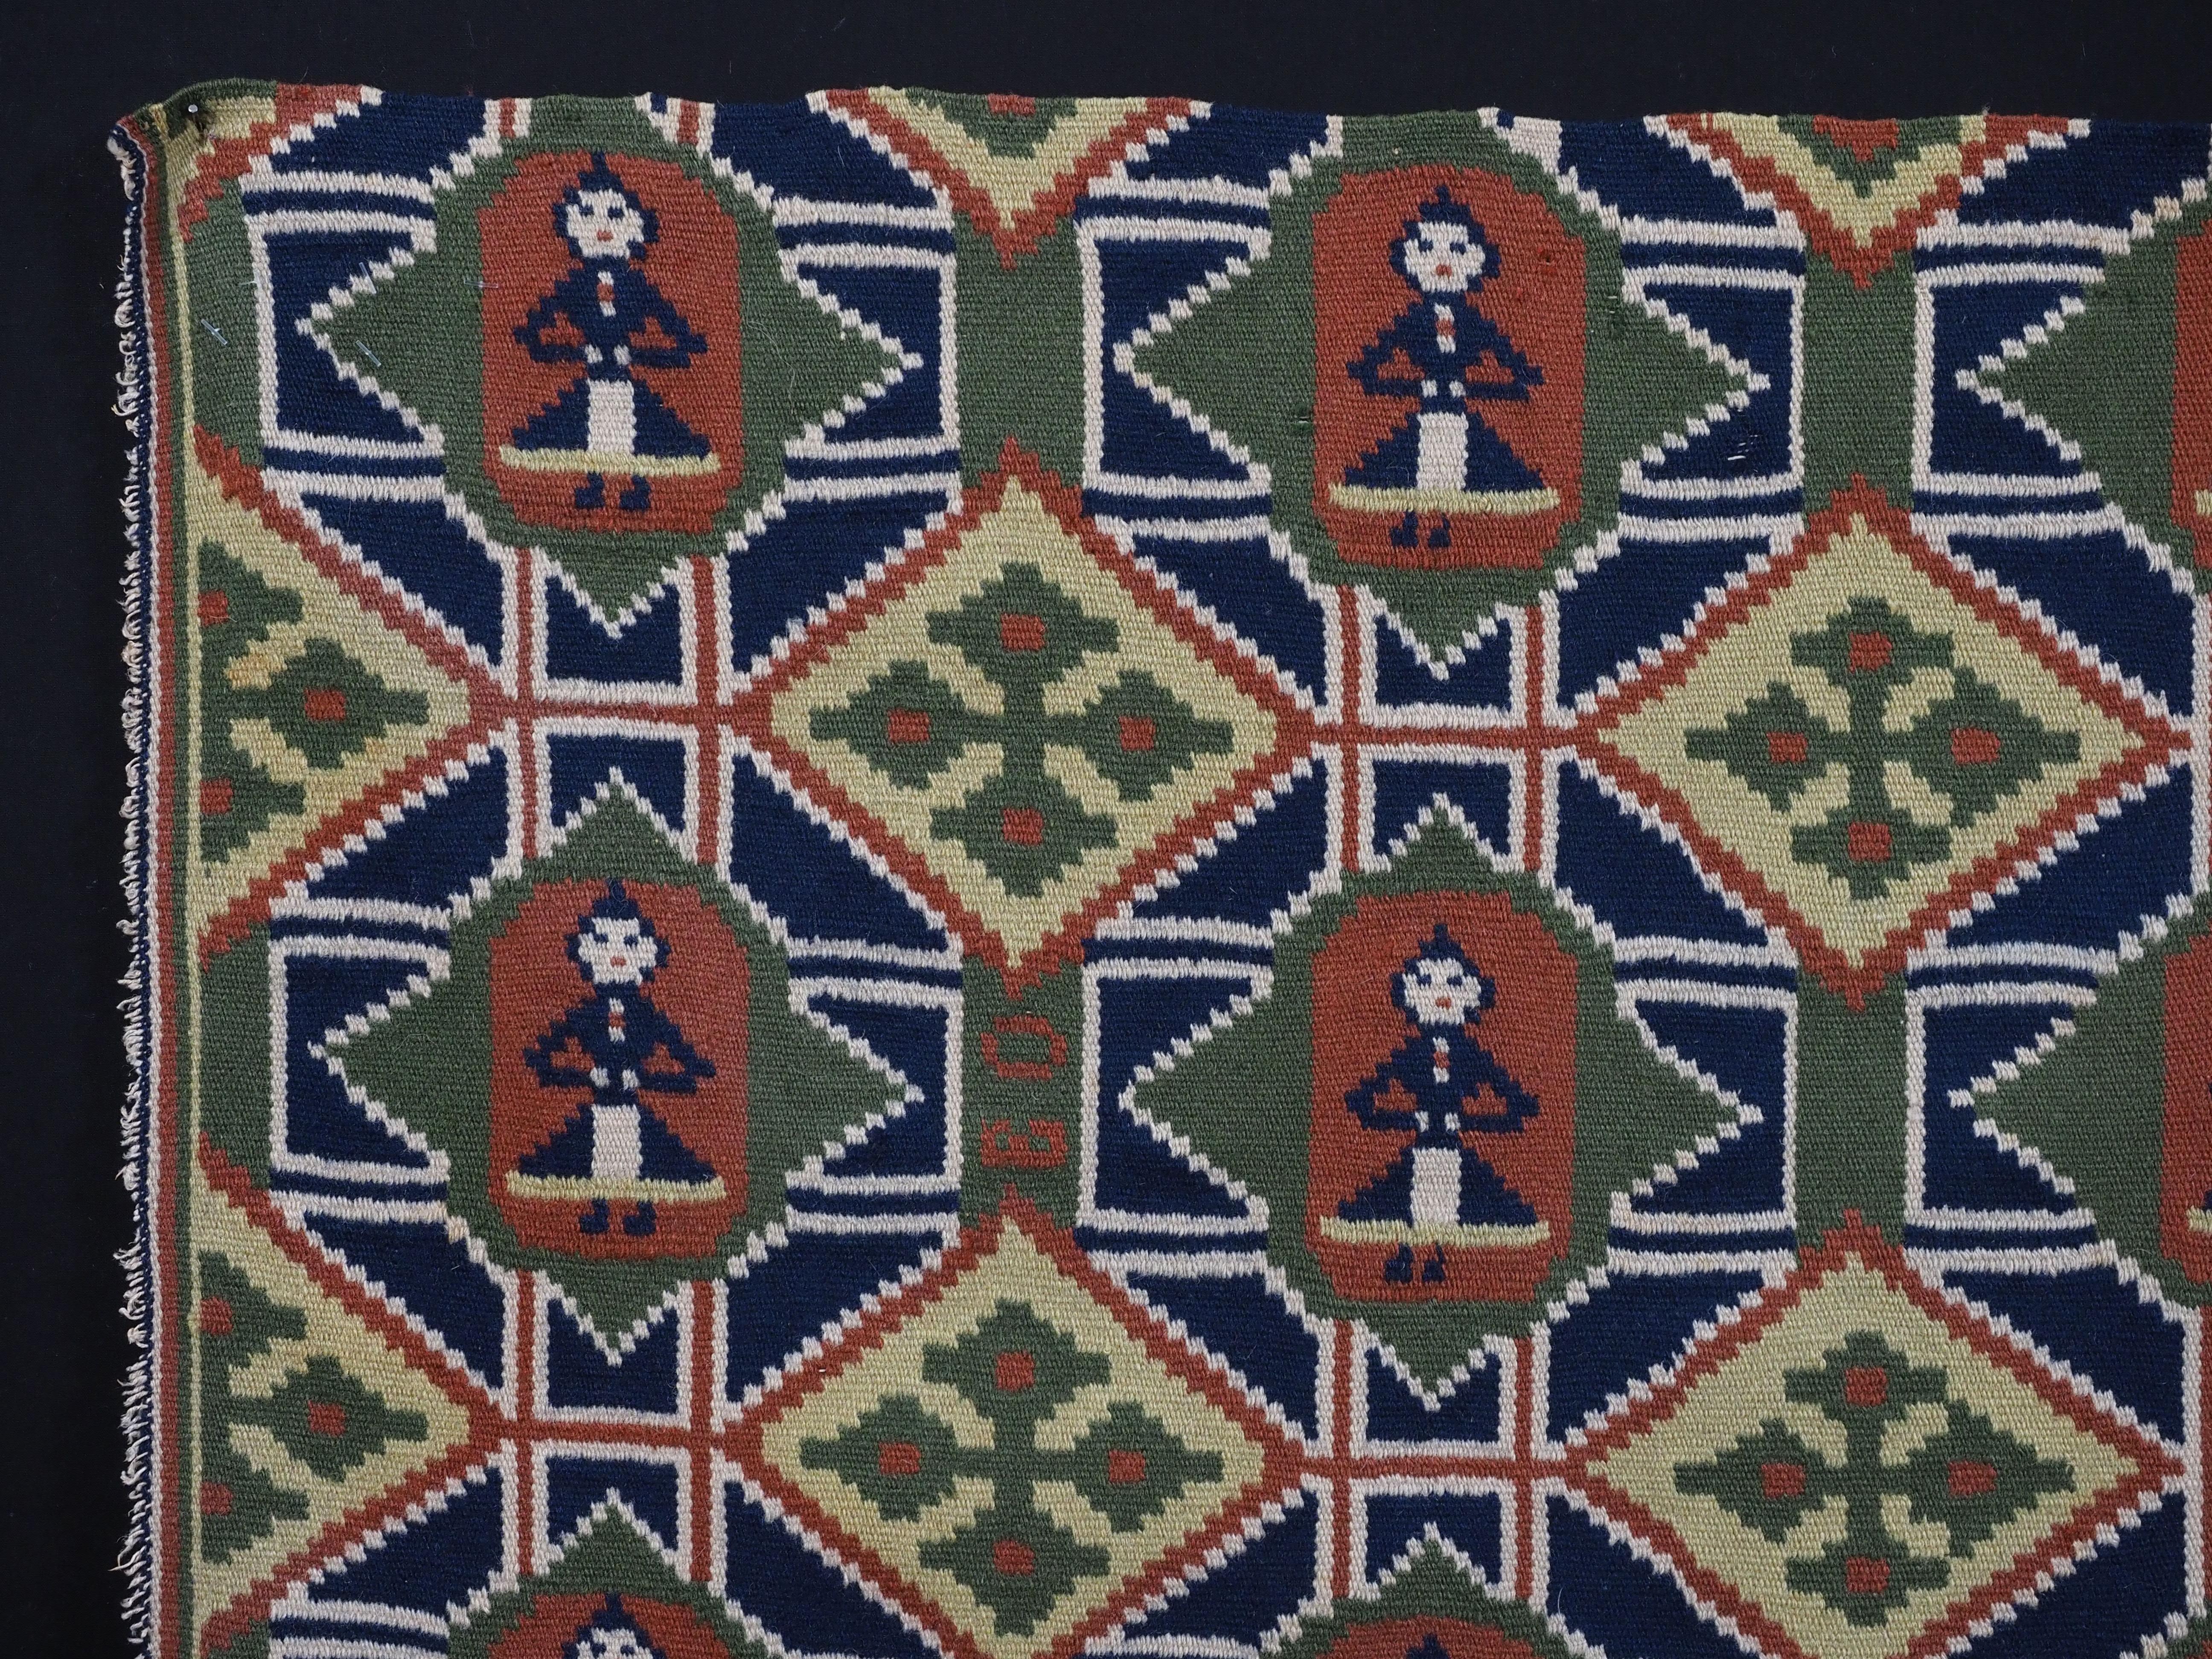 Size: 2ft 4in x 1ft 10in (71 x 56cm).

Antique Swedish carriage cushion cover face.

Mid 19th century.

This beautiful cushion cover face is woven in interlocked tapestry technique; the design is a diamond lattice containing nine ladies in